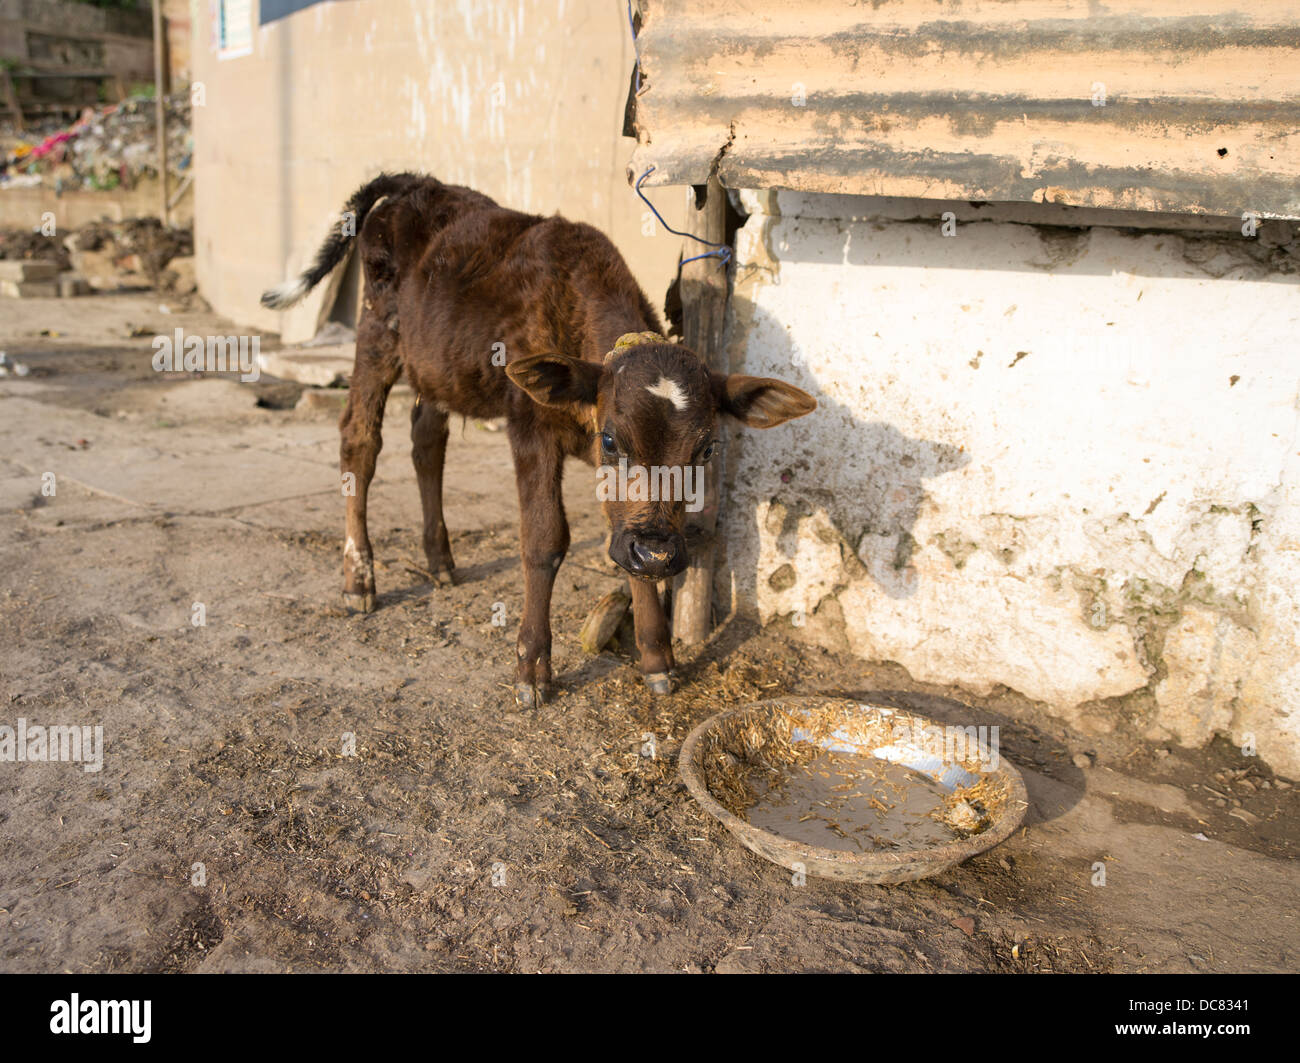 Baby calf / sacred cow. Life on the banks of the Ganges River - Varanasi, India Stock Photo